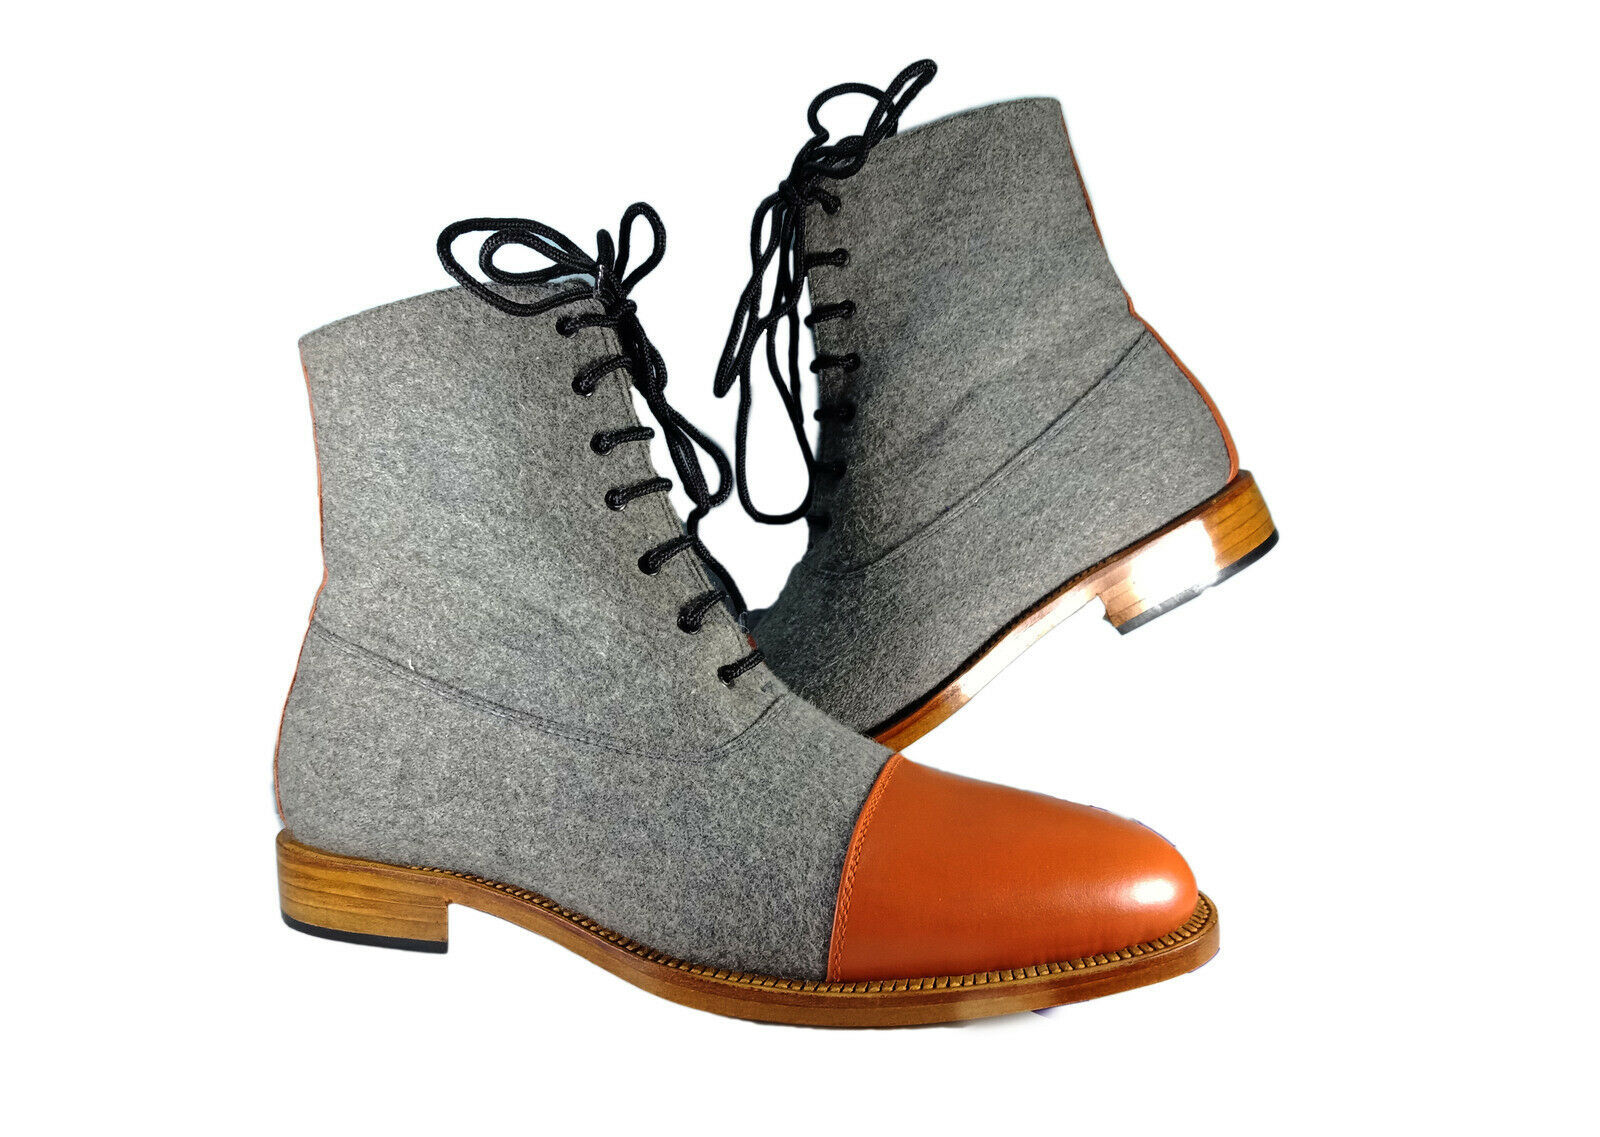 Magnificiant Gray Tweed Orange Tone Cap Toe Leather Men High Ankle Lace Up Boots